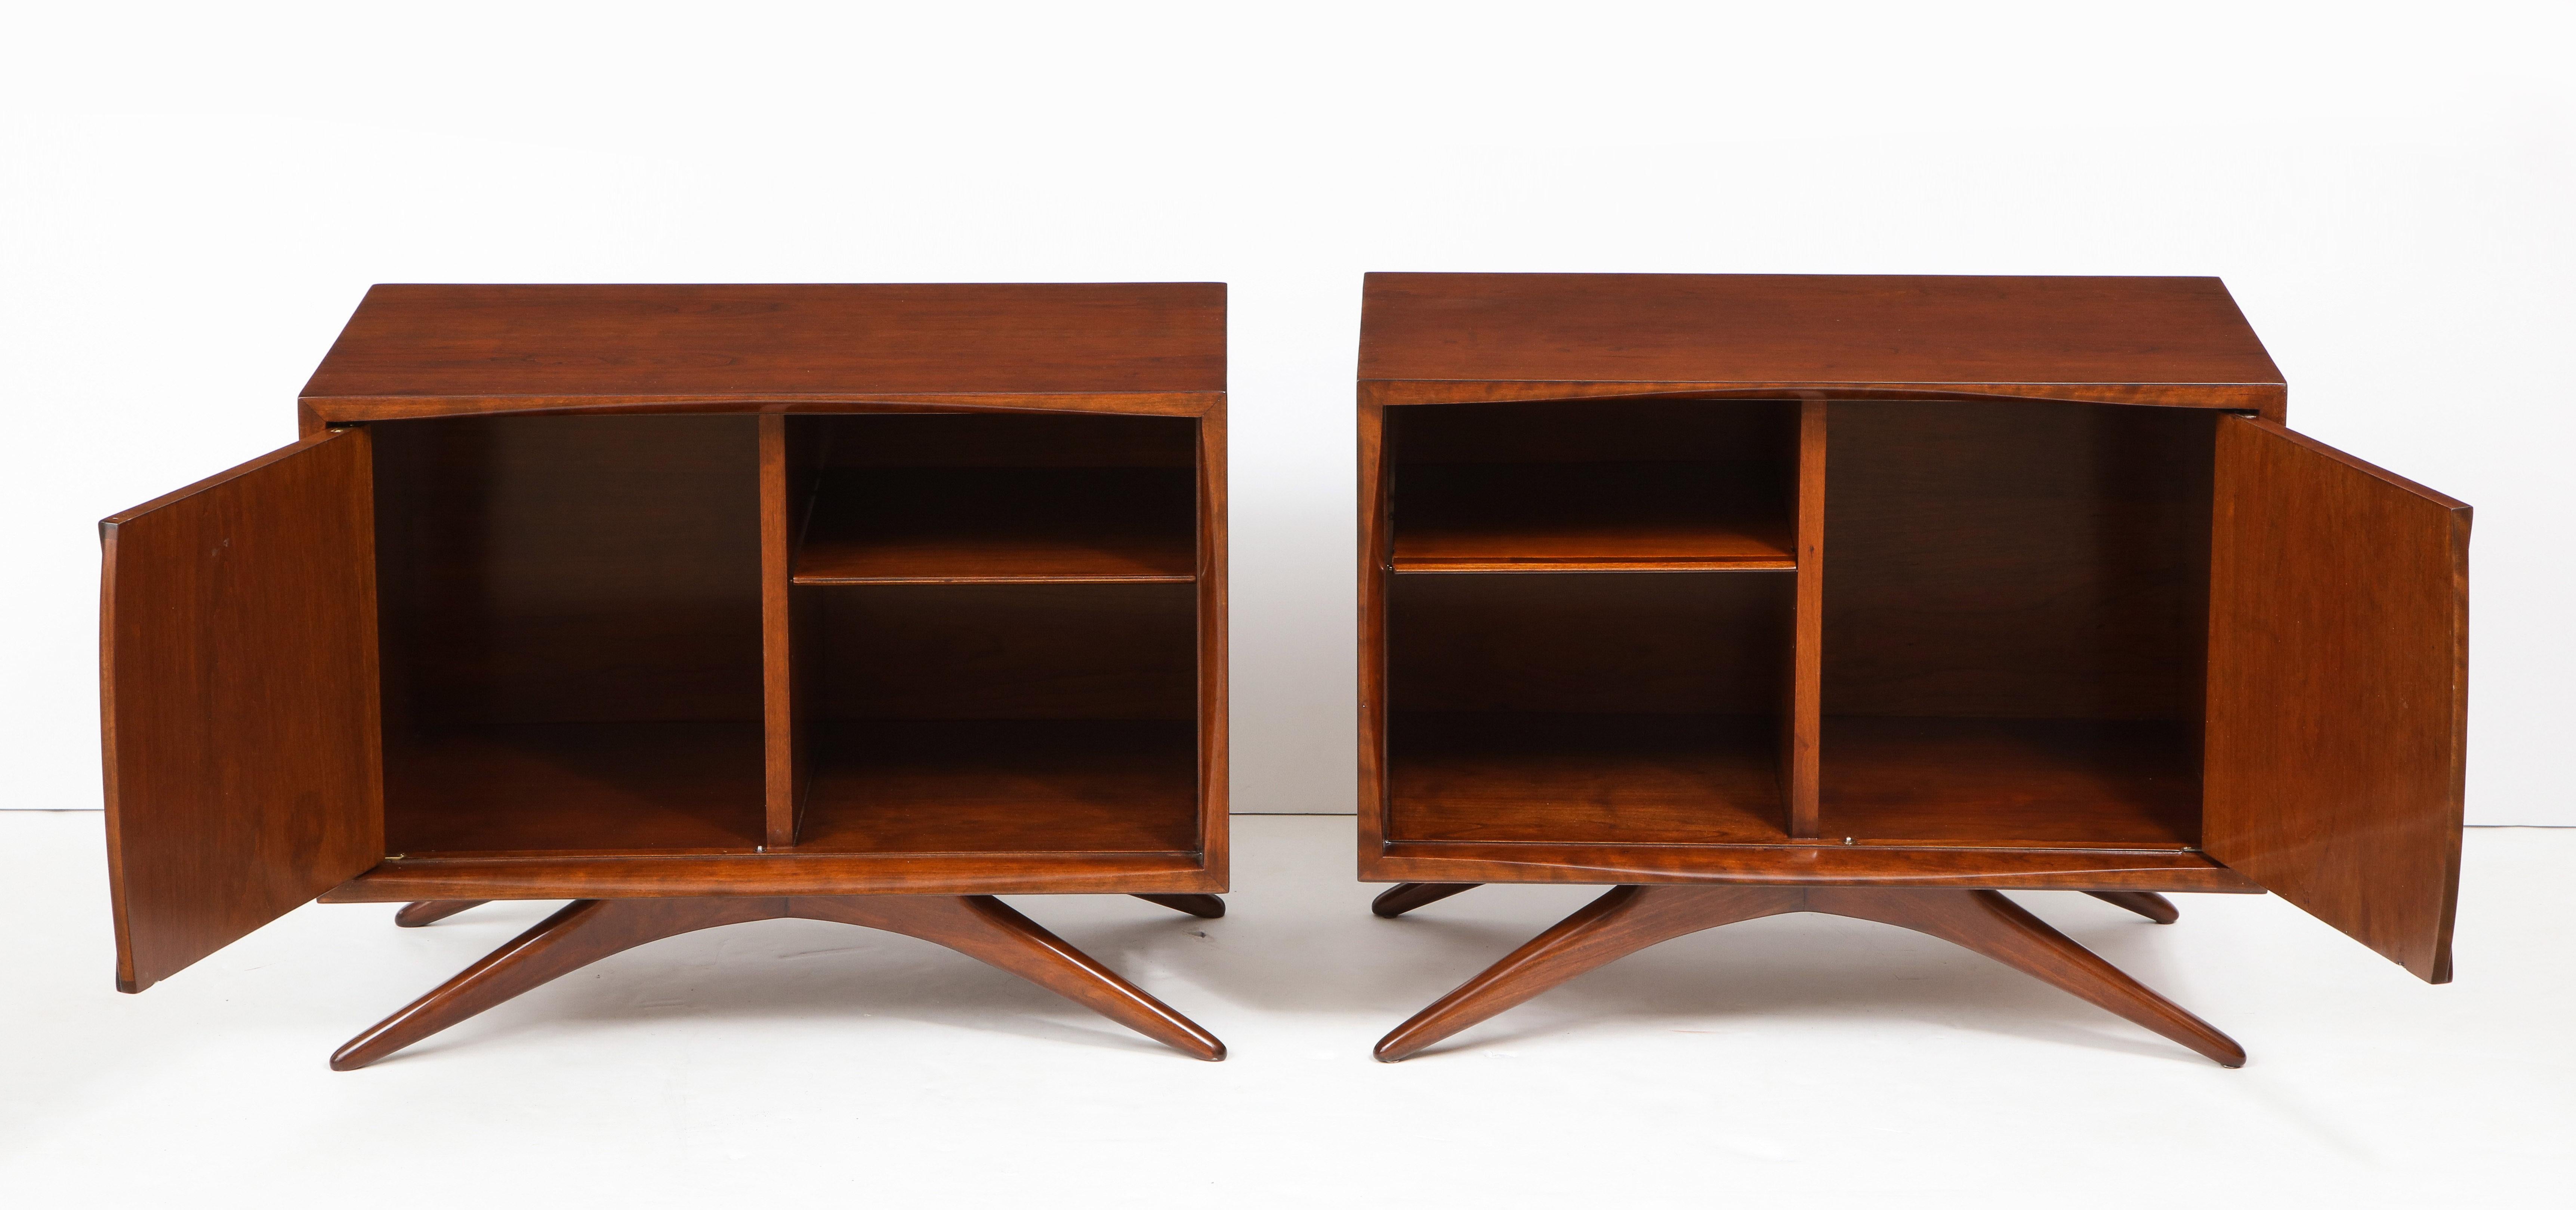 Vladimir Kagan design nightstands for Grosfeld House, N.Y. Perfectly refinished in a medium walnut color with one door and one adjustable shelf.